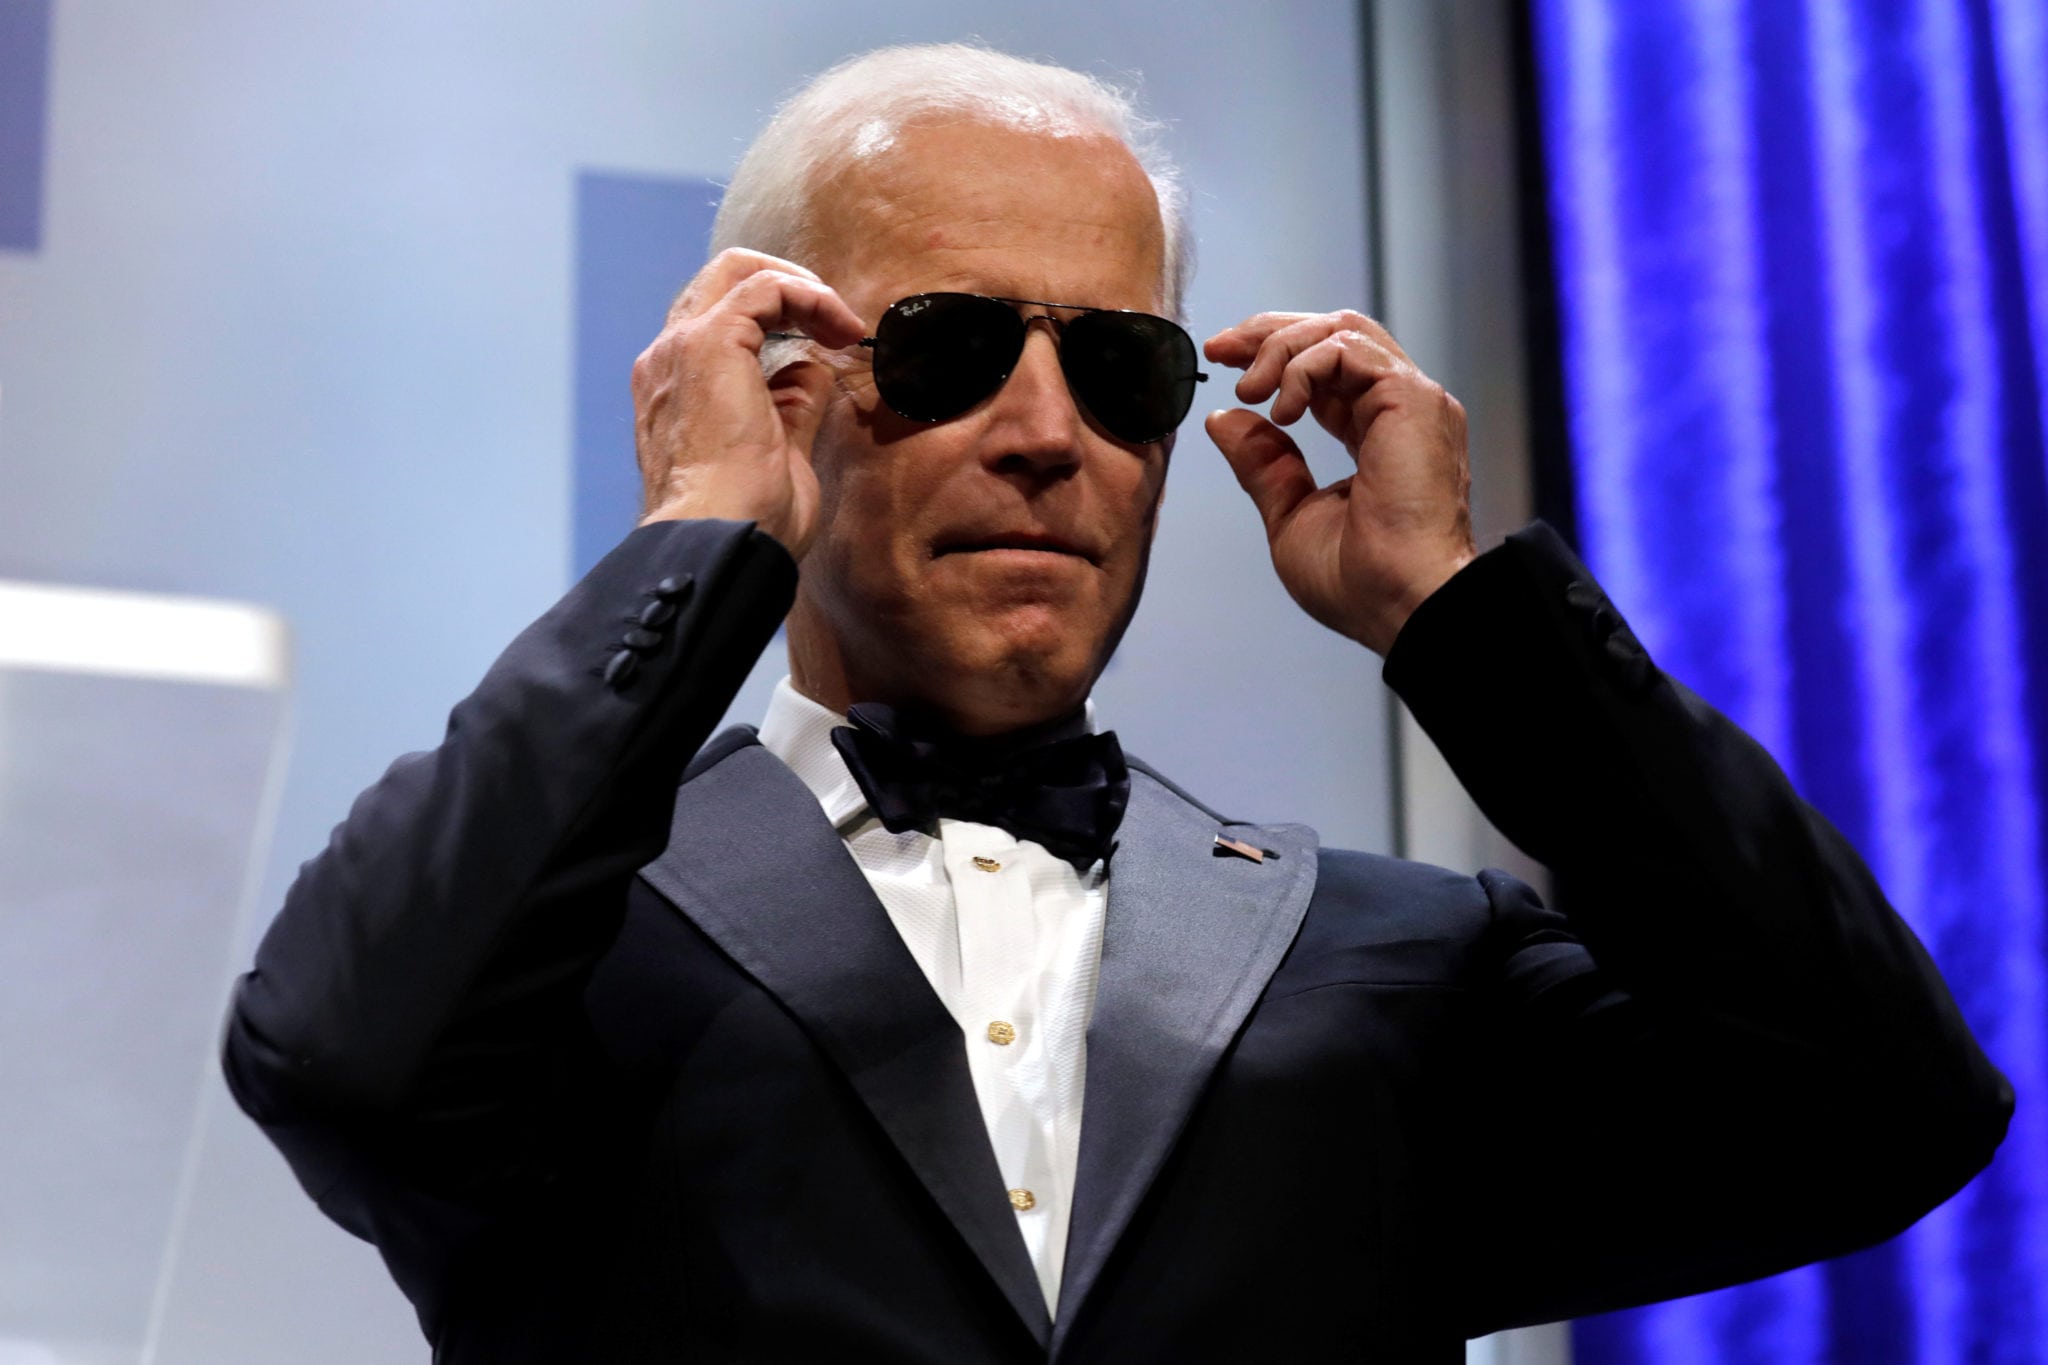 MAGA Supporters Furious After Donald Trump’s Favorite Pollster Posts Best Biden Approval Ratings Yet